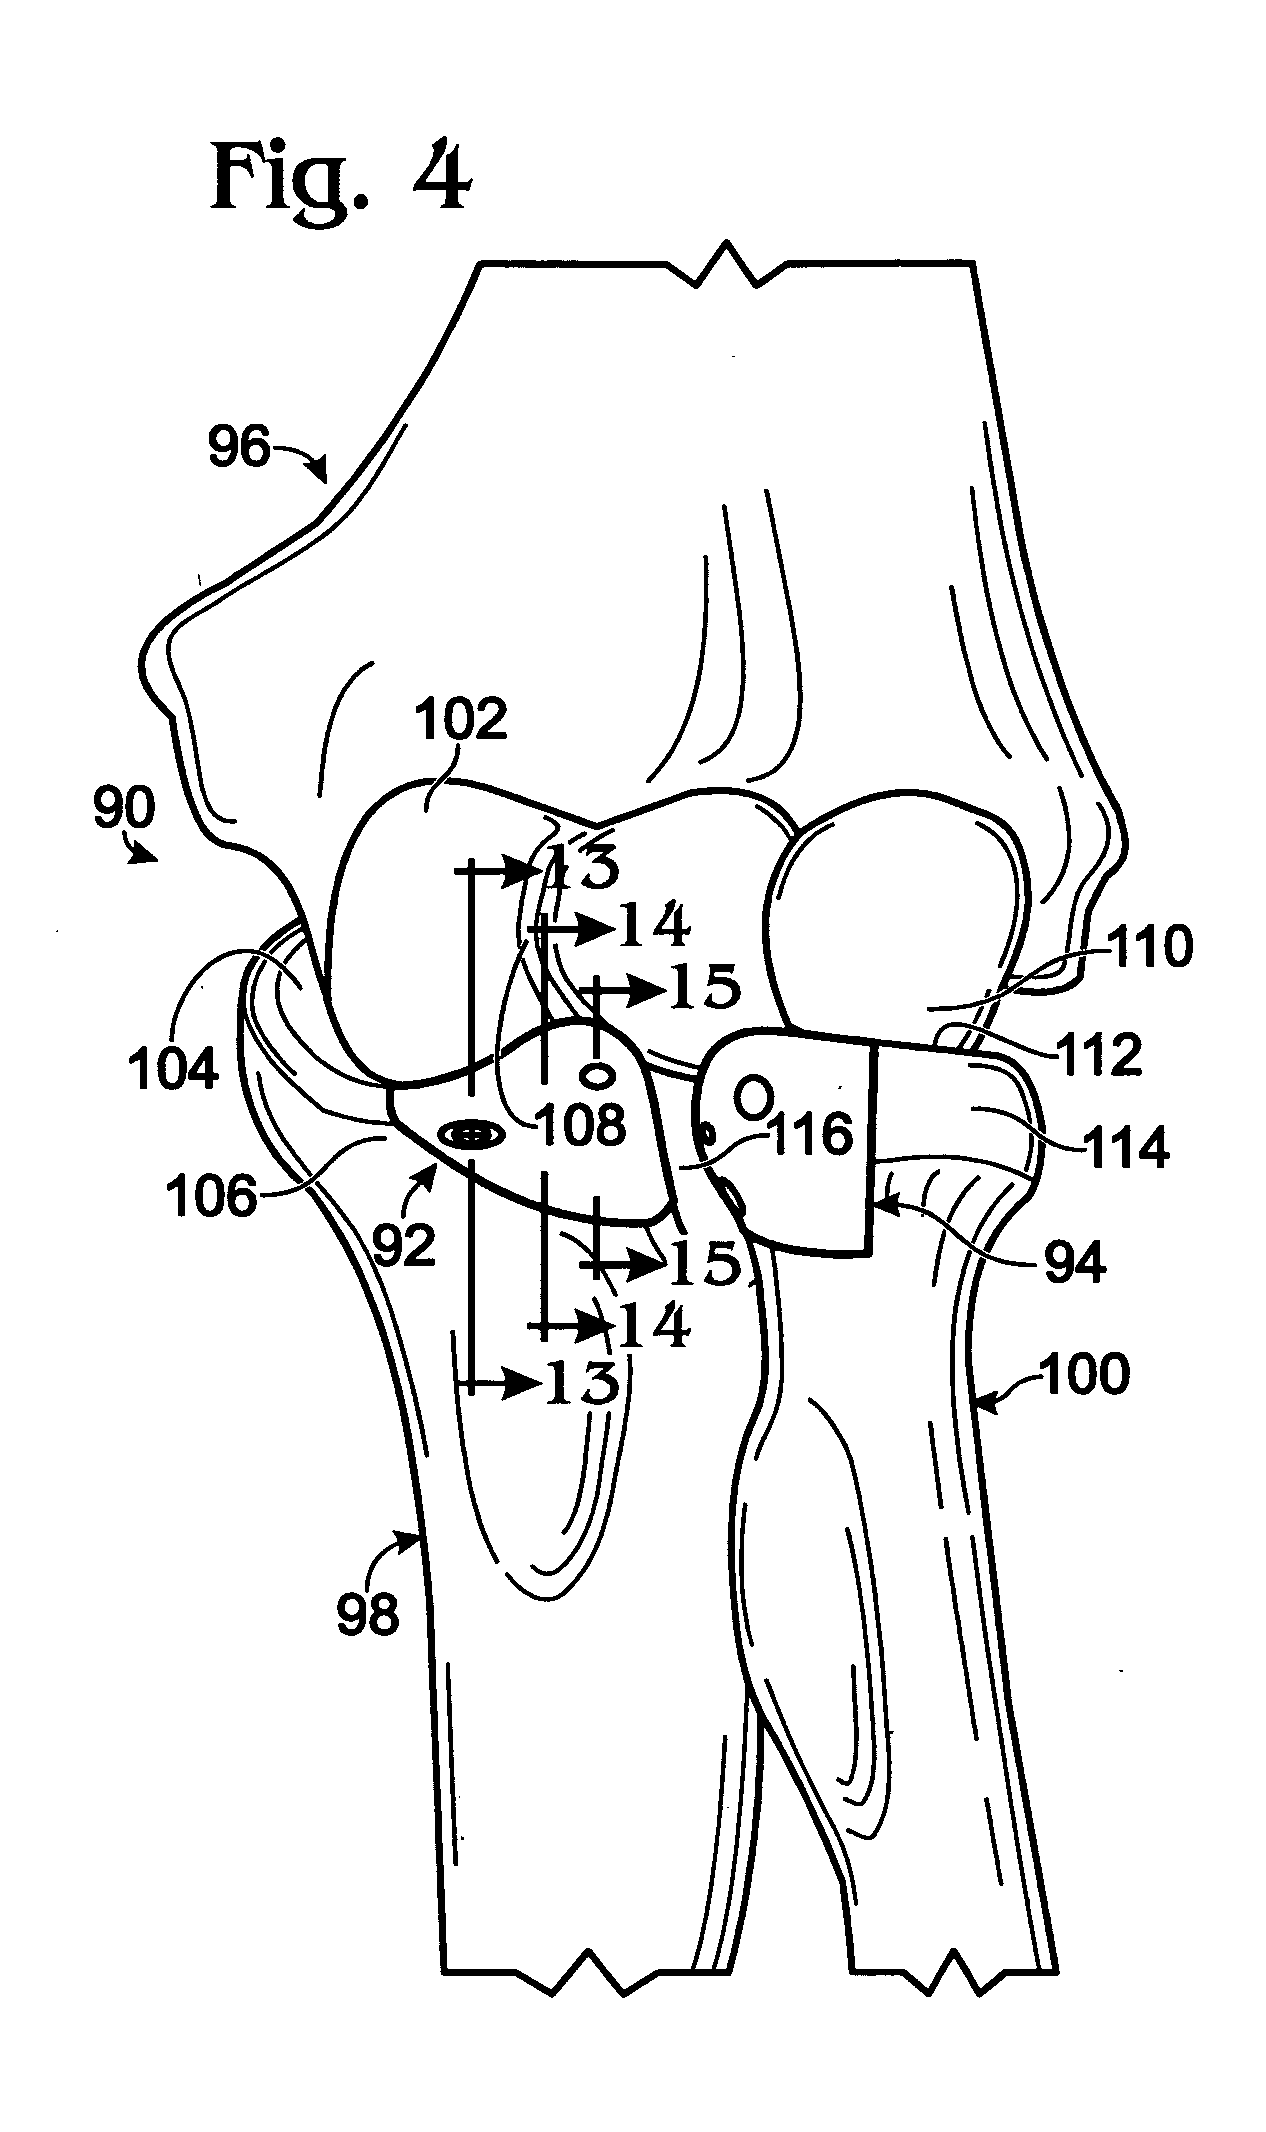 Prosthesis for partial replacement of an articulating surface on bone